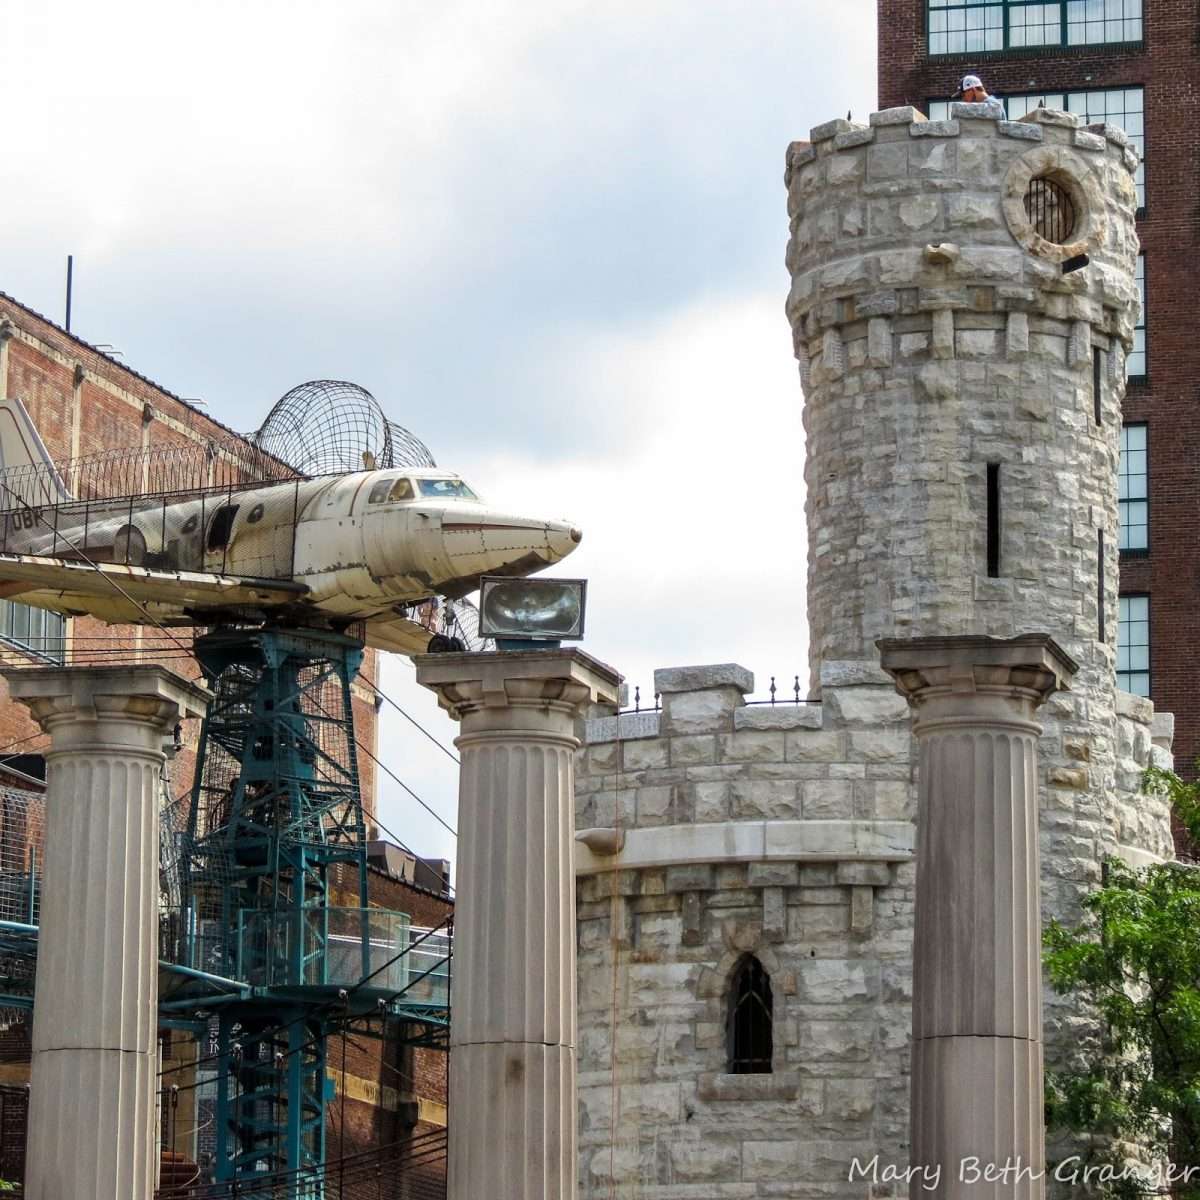 Review of a Day at City Museum in St. Louis